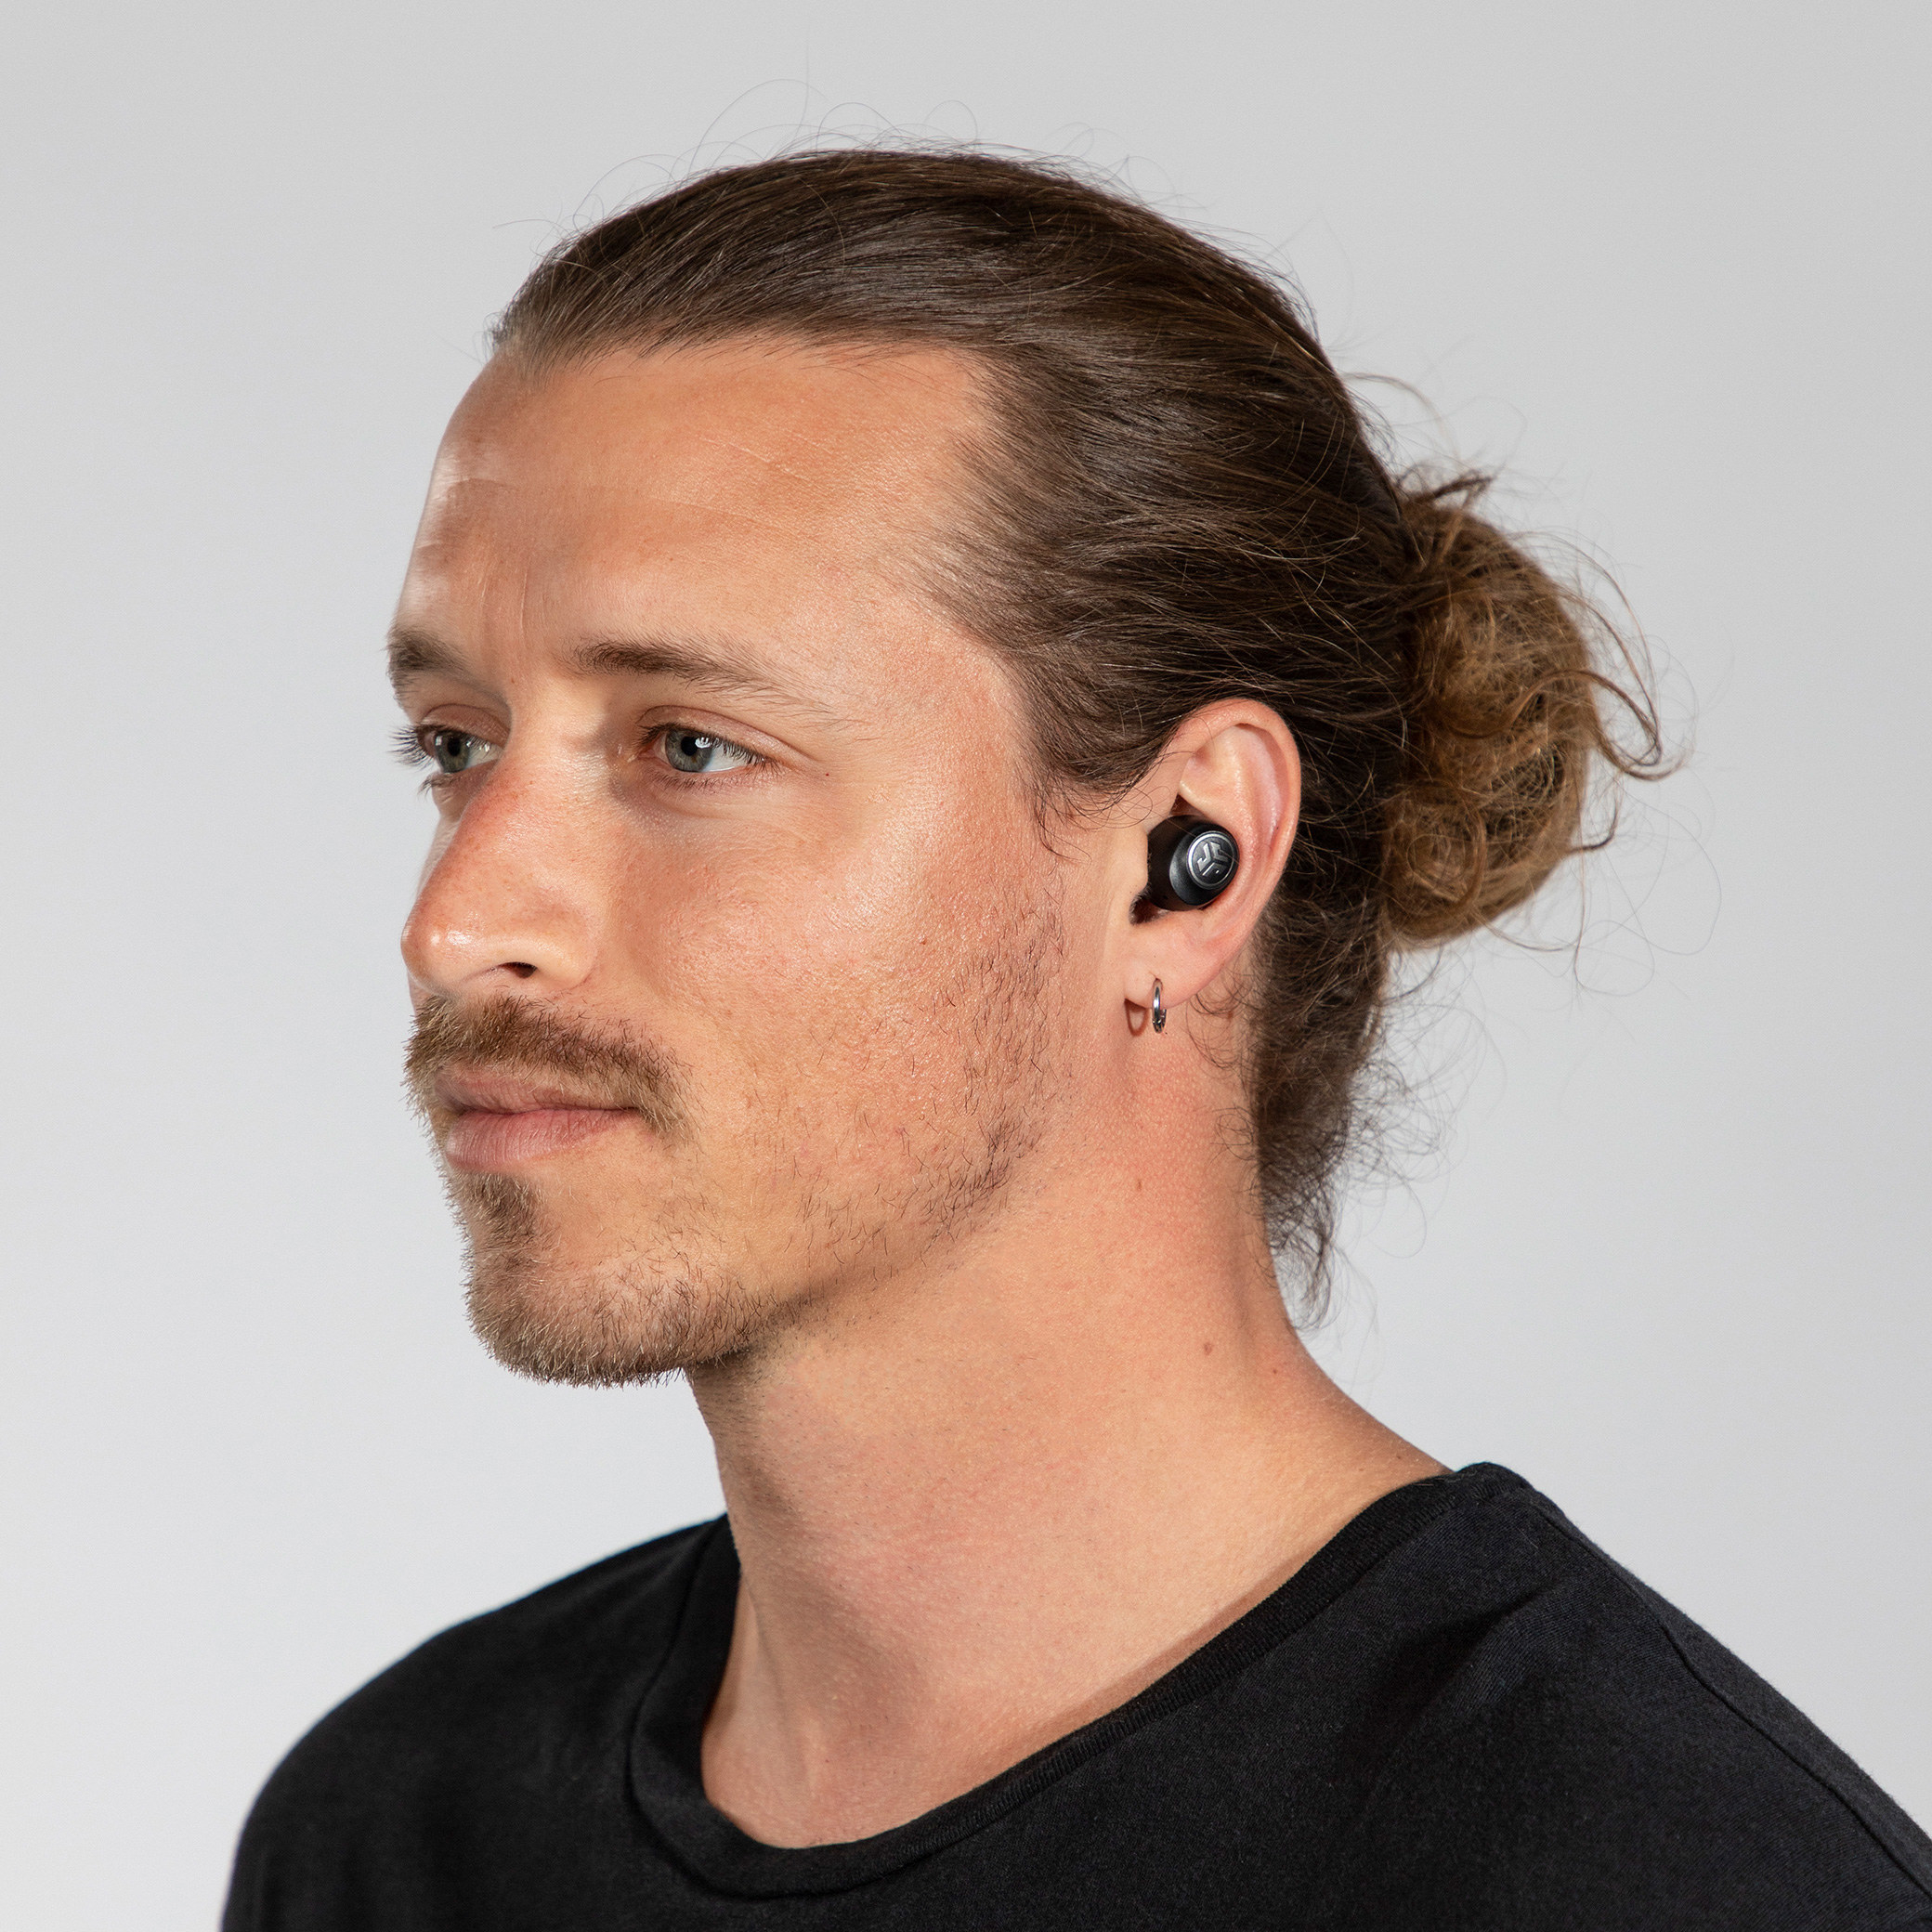 A model wearing the earbuds